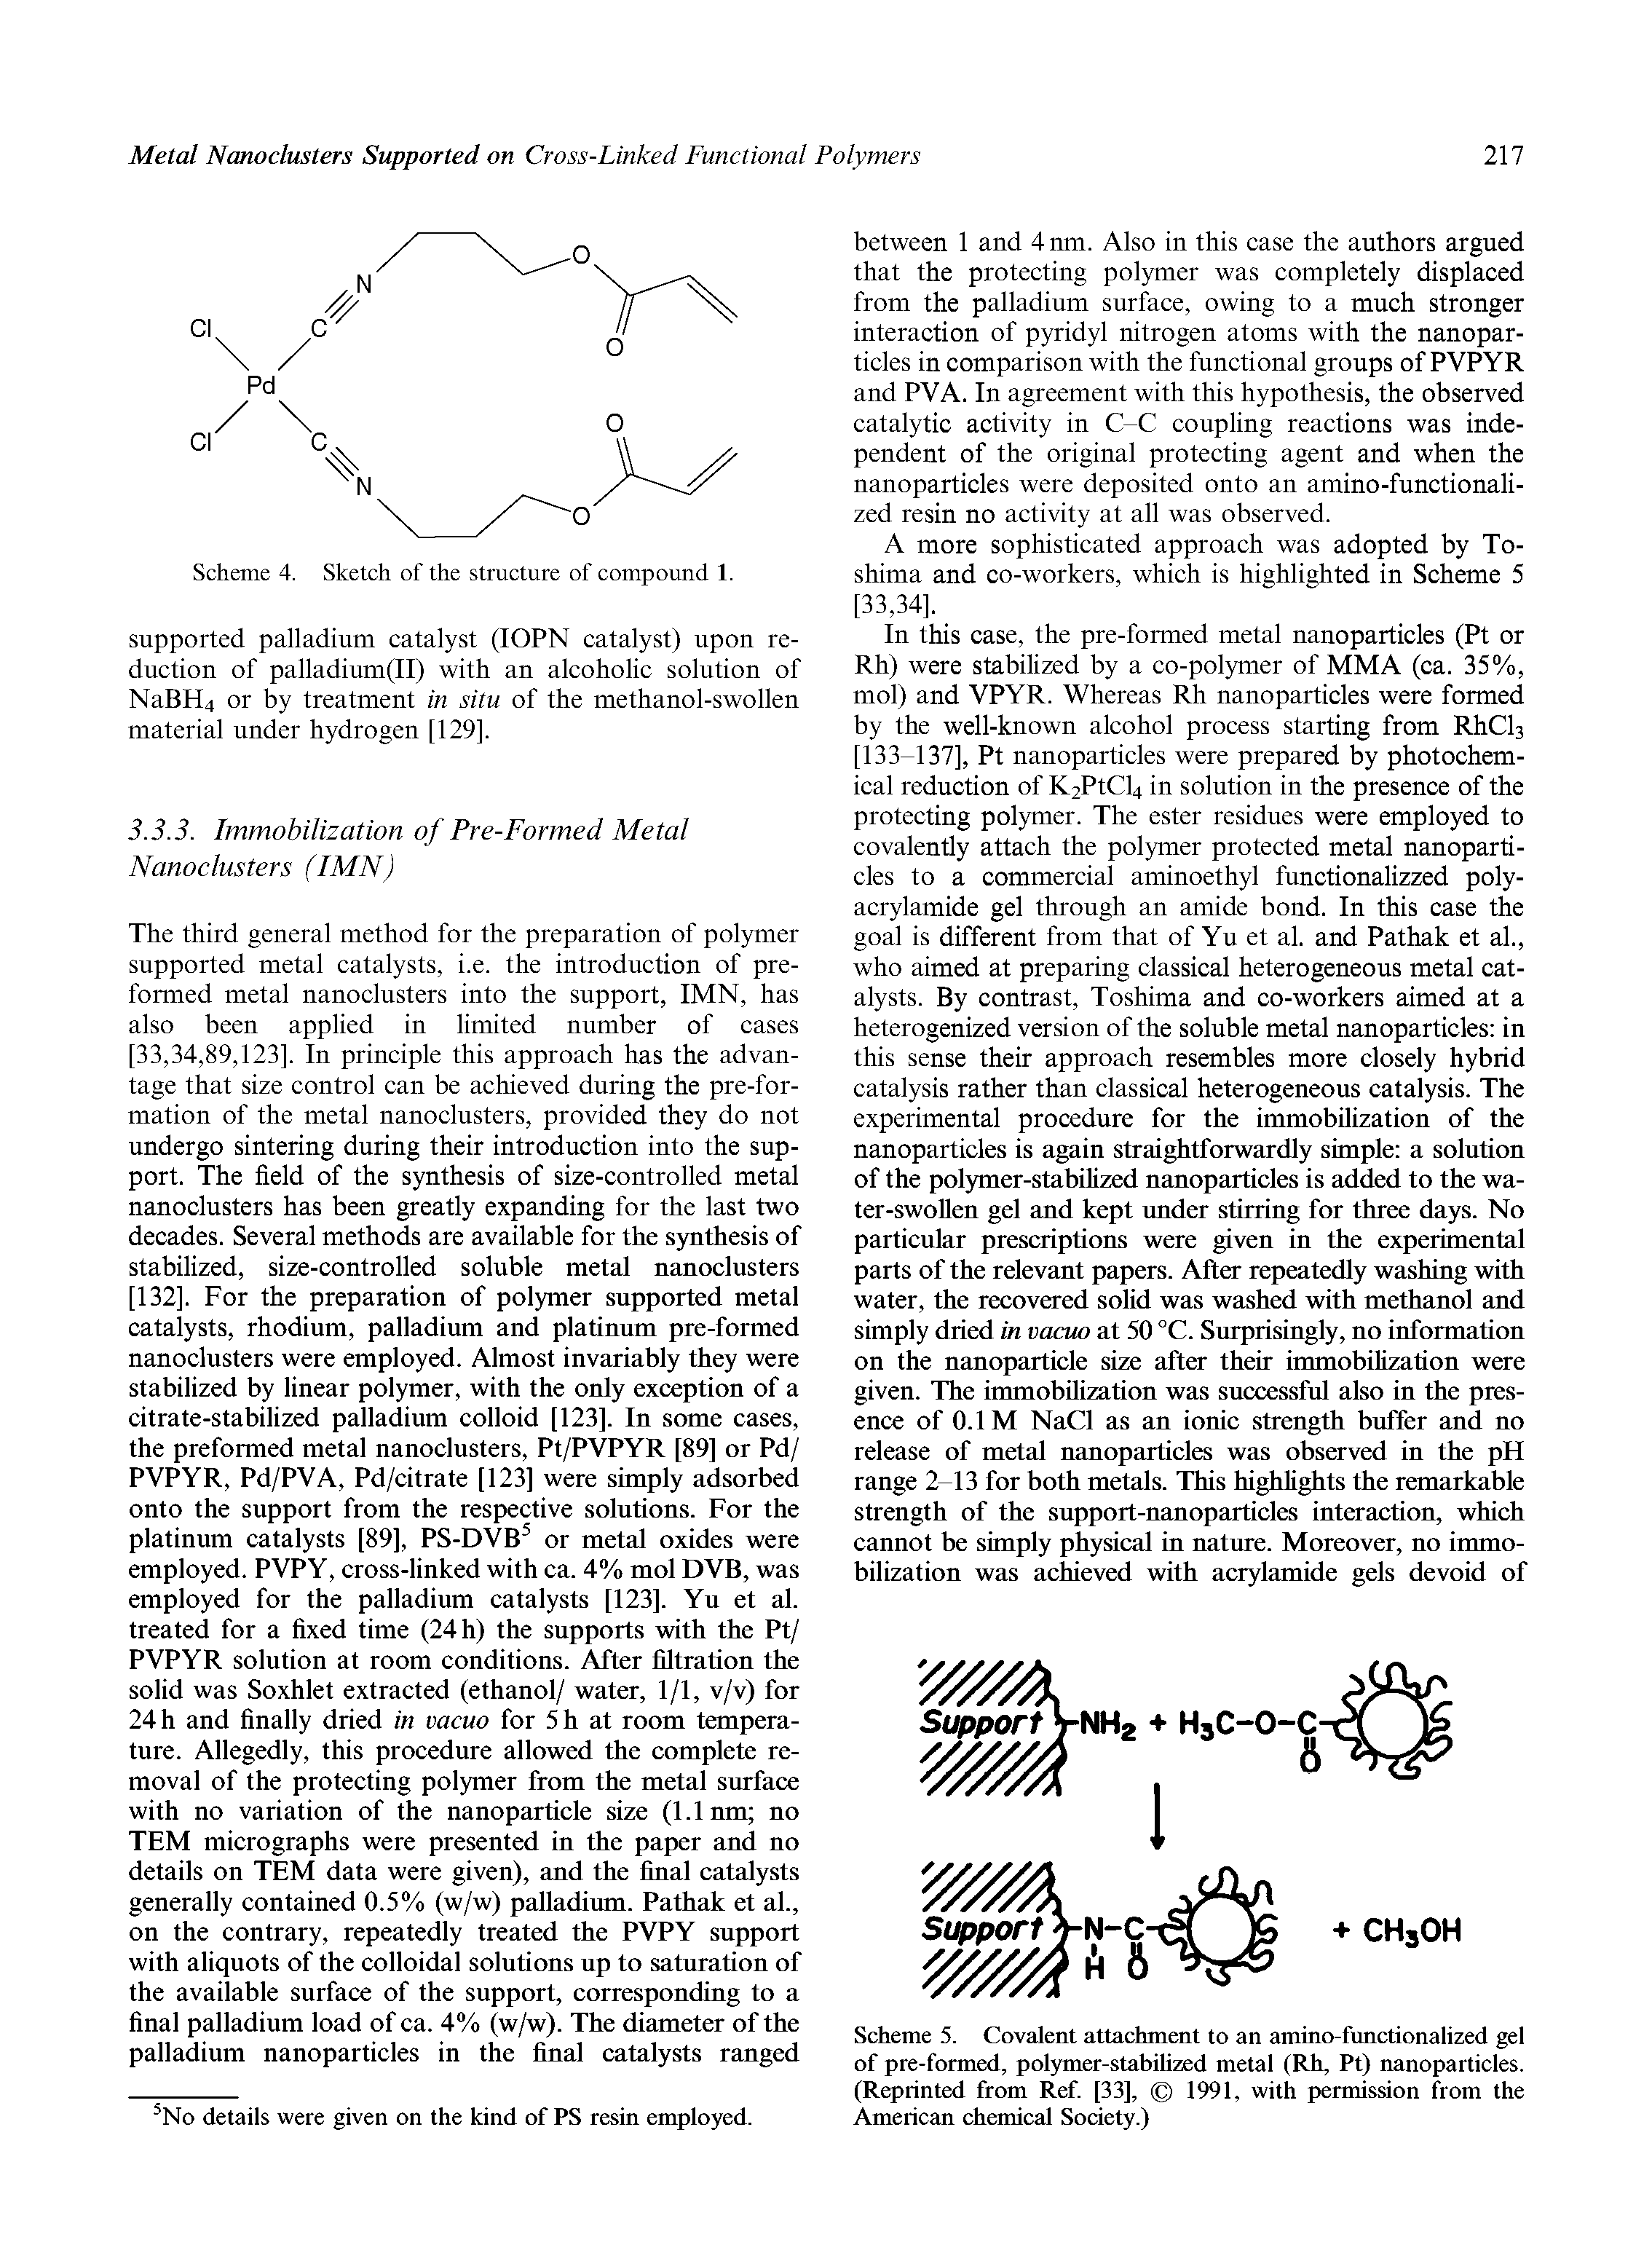 Scheme 5. Covalent attachment to an amino-functionalized gel of pre-formed, polymer-stabilized metal (Rh, Pt) nanoparticles. (Reprinted from Ref. [33], 1991, with permission from the American chemical Society.)...